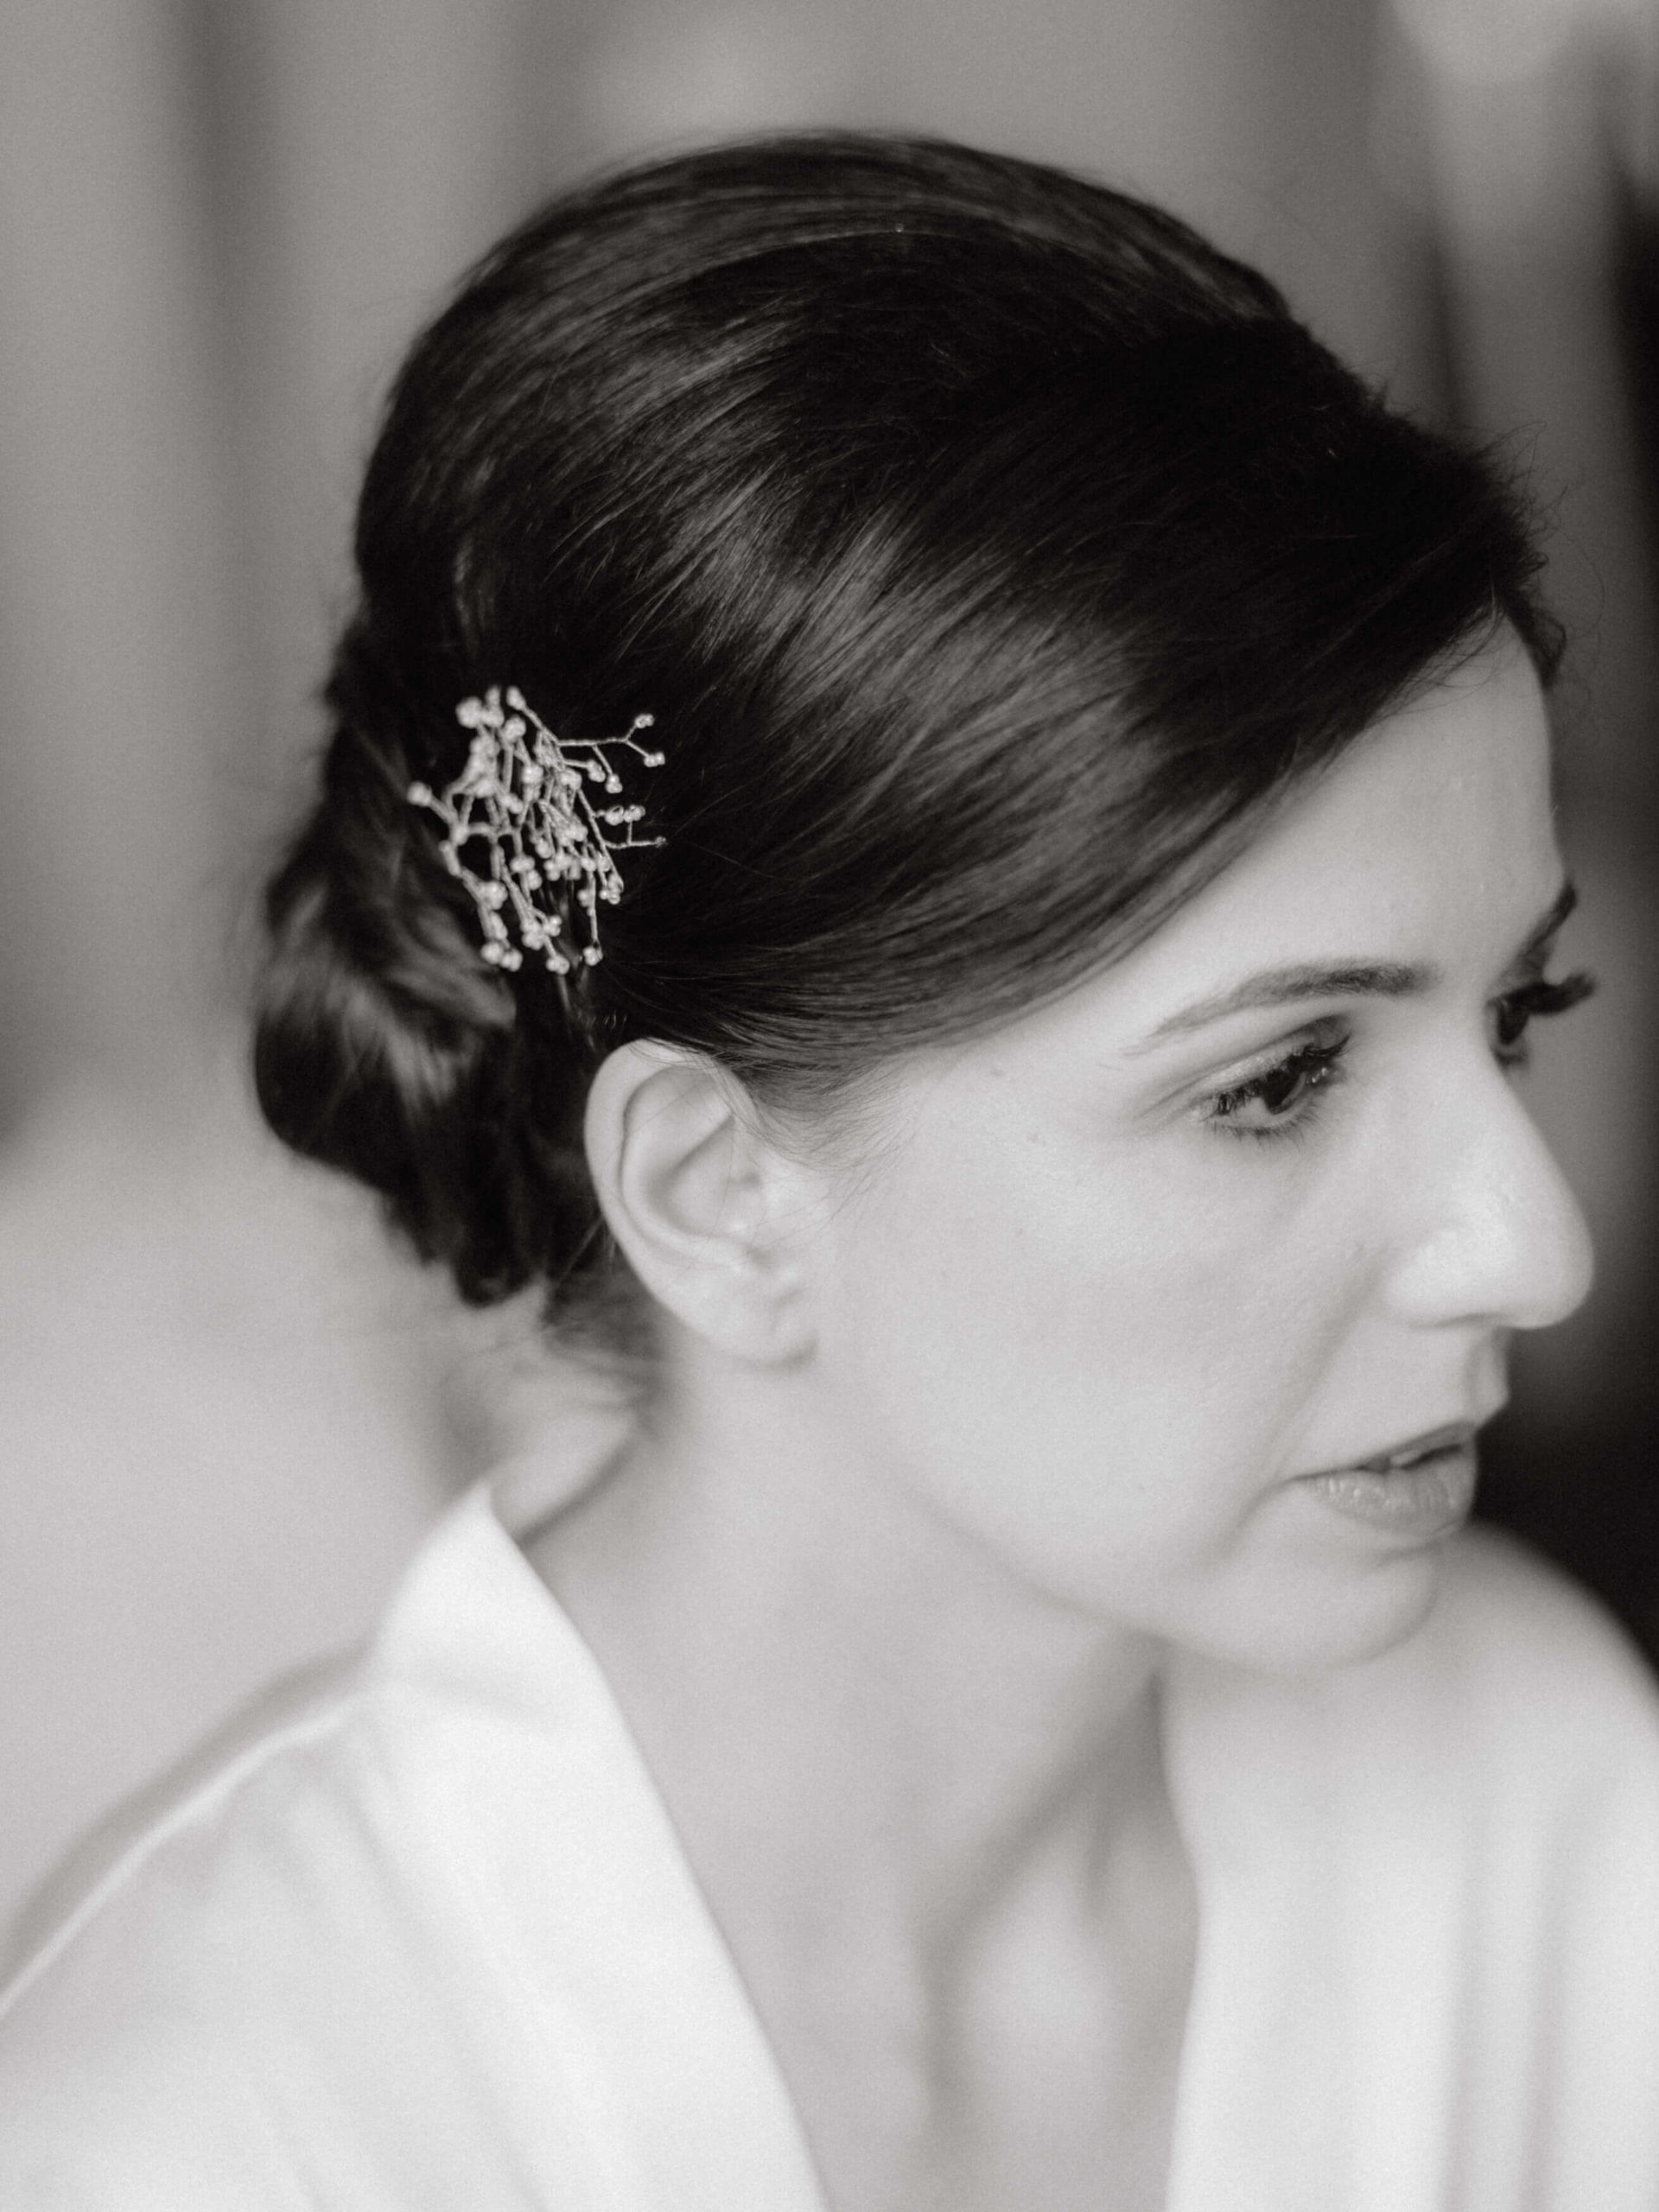 The bride's getting-ready photo at NYC. Hours of wedding photography image by Jenny Fu Studio.